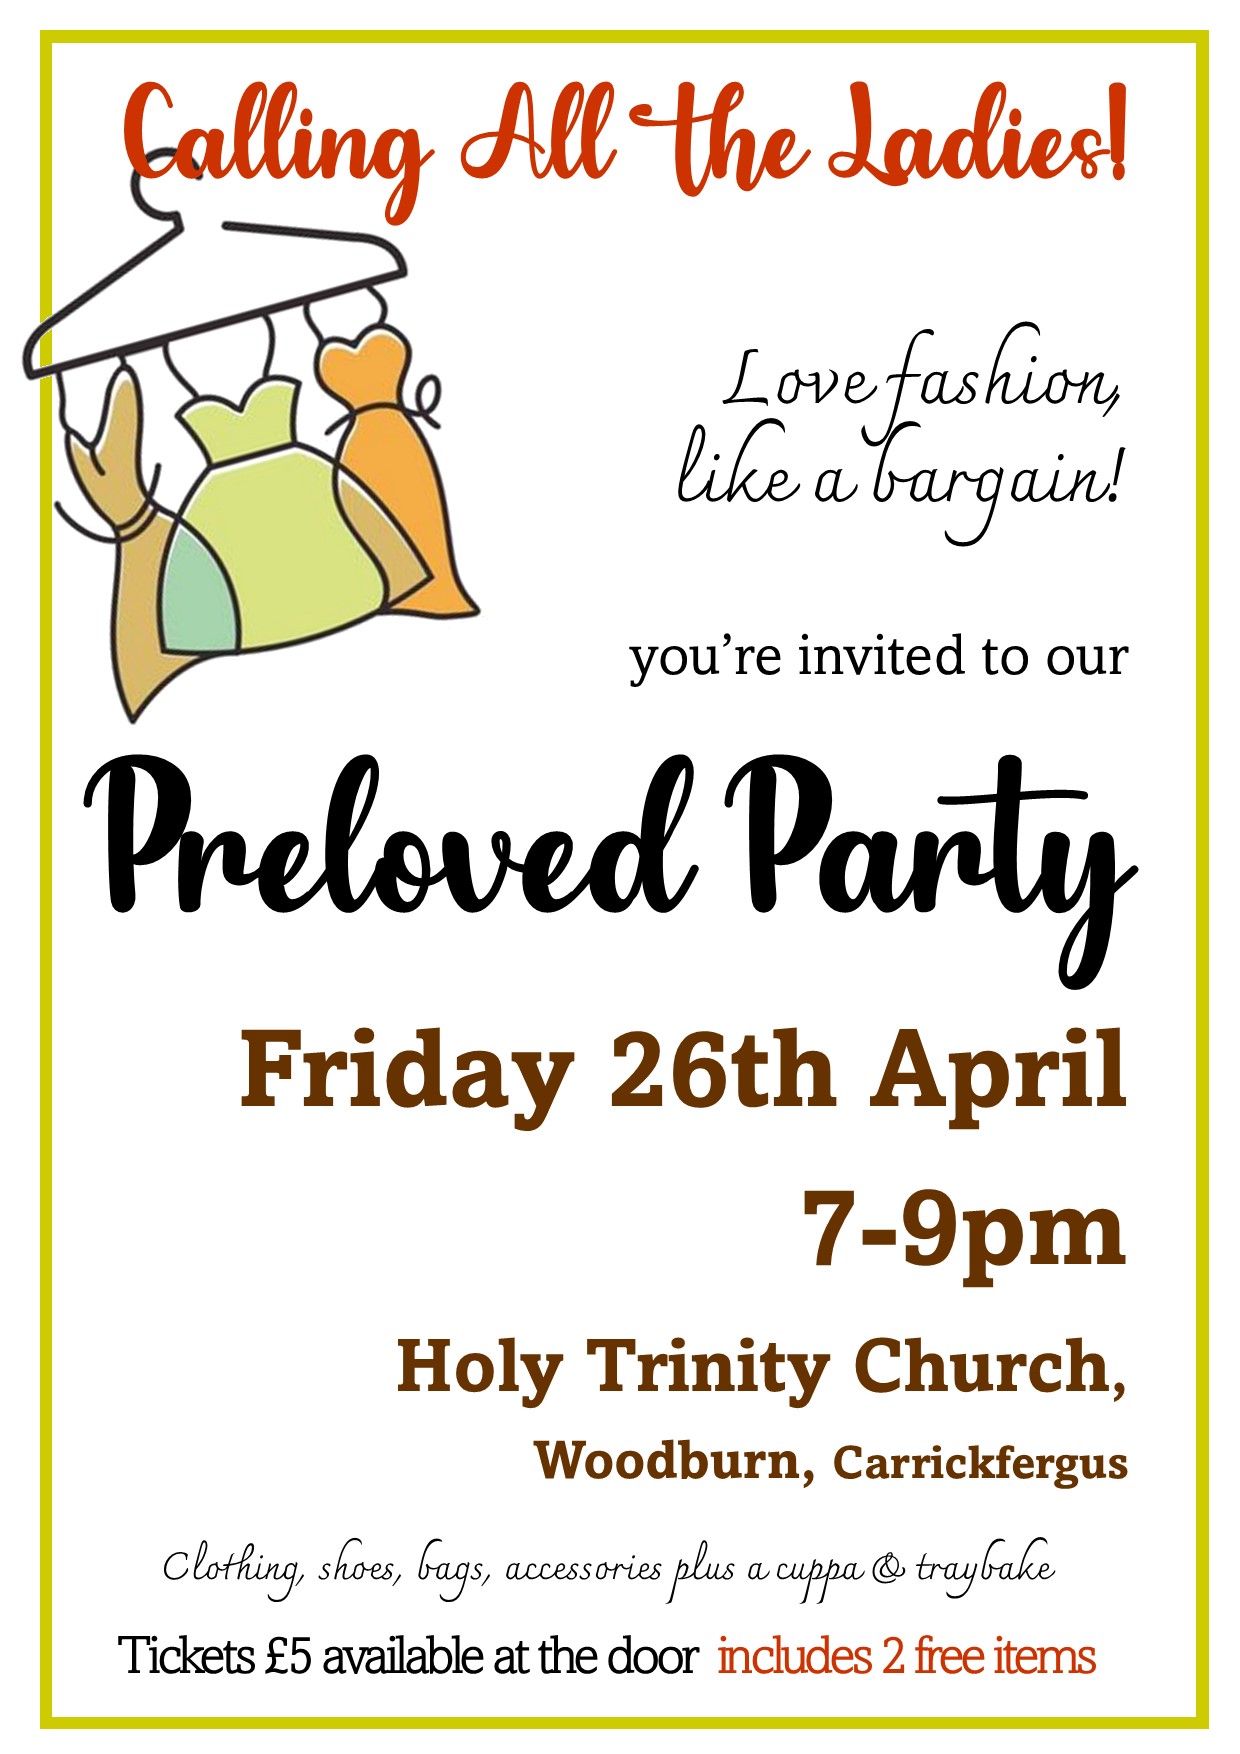 Love fashion? Like a bargain? You're invited to our Preloved party. Friday 26th April, 7-9pm, Holy Trinity Church, Woodburn Carrickfergus. Tickets £5 at the door includes 2 free items. The image includes a drawing of some women's clothes on a hanger.